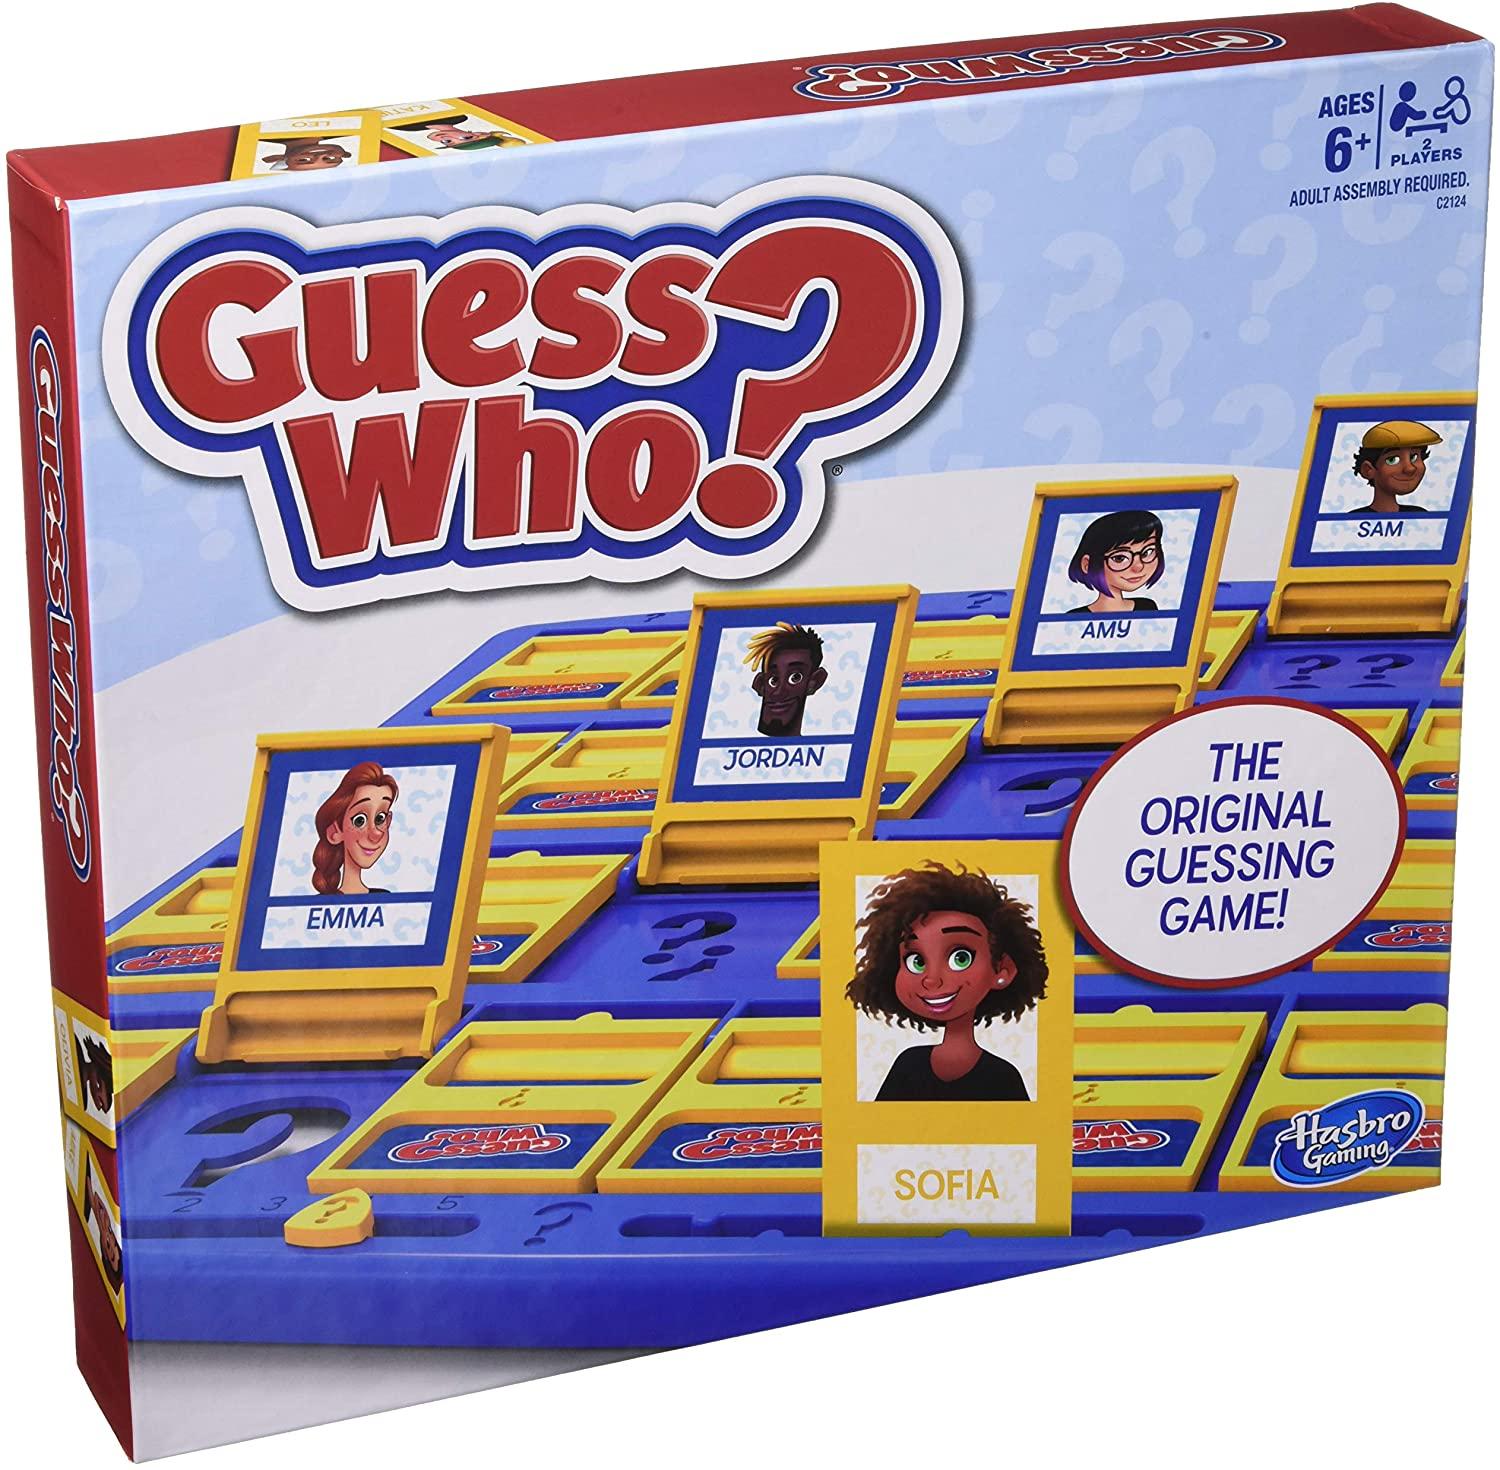 Hasbro Guess Who Guessing Game for $5.99